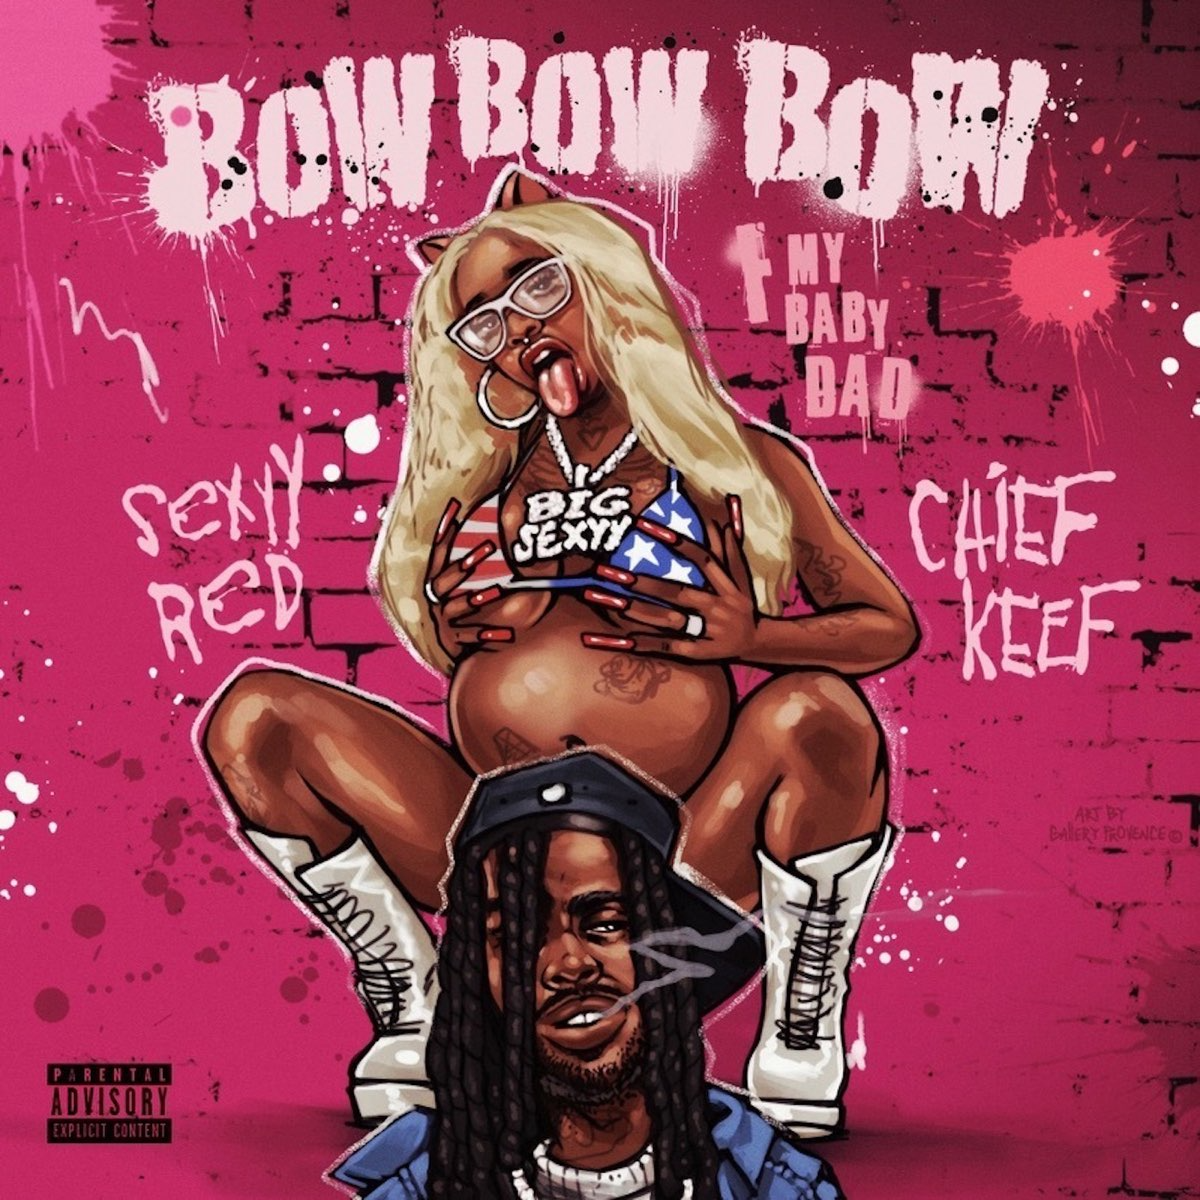 Sexyy Red & Chief Keef Bow Bow Bow (F My Baby Dad) Mp3 Download